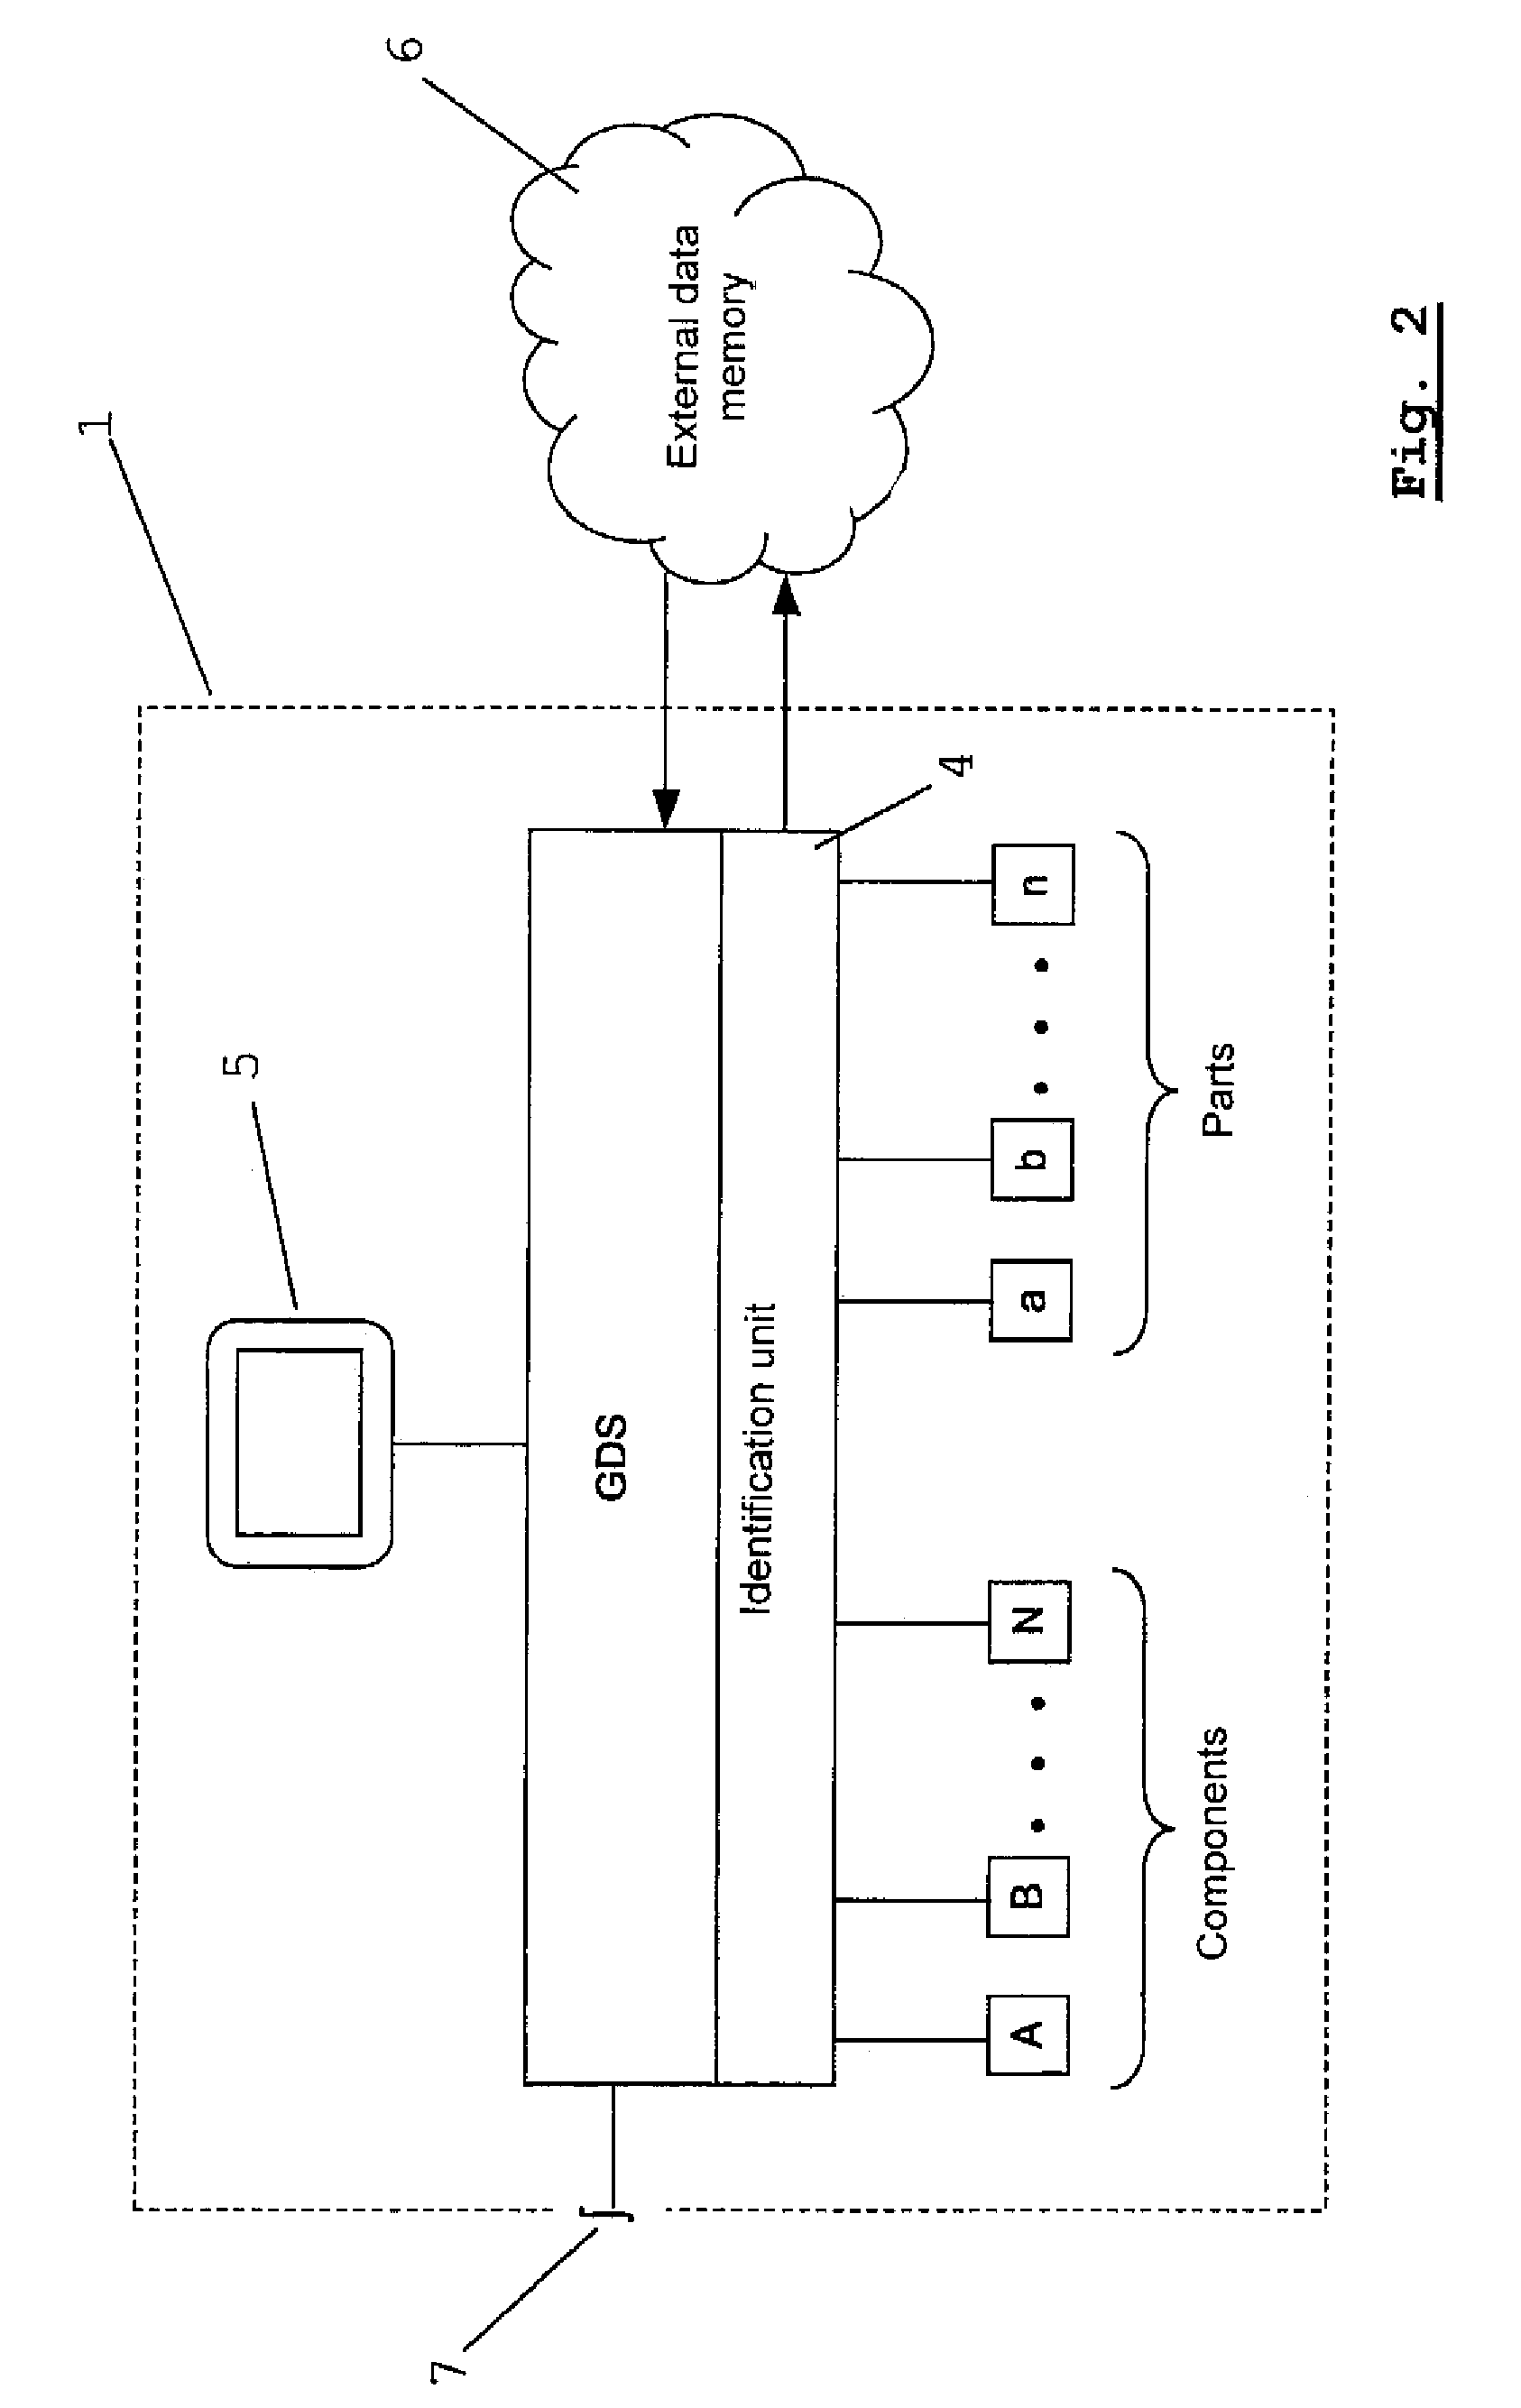 Method for providing comprehensive documentation information of complex machines and systems, in particular an injection molding machine